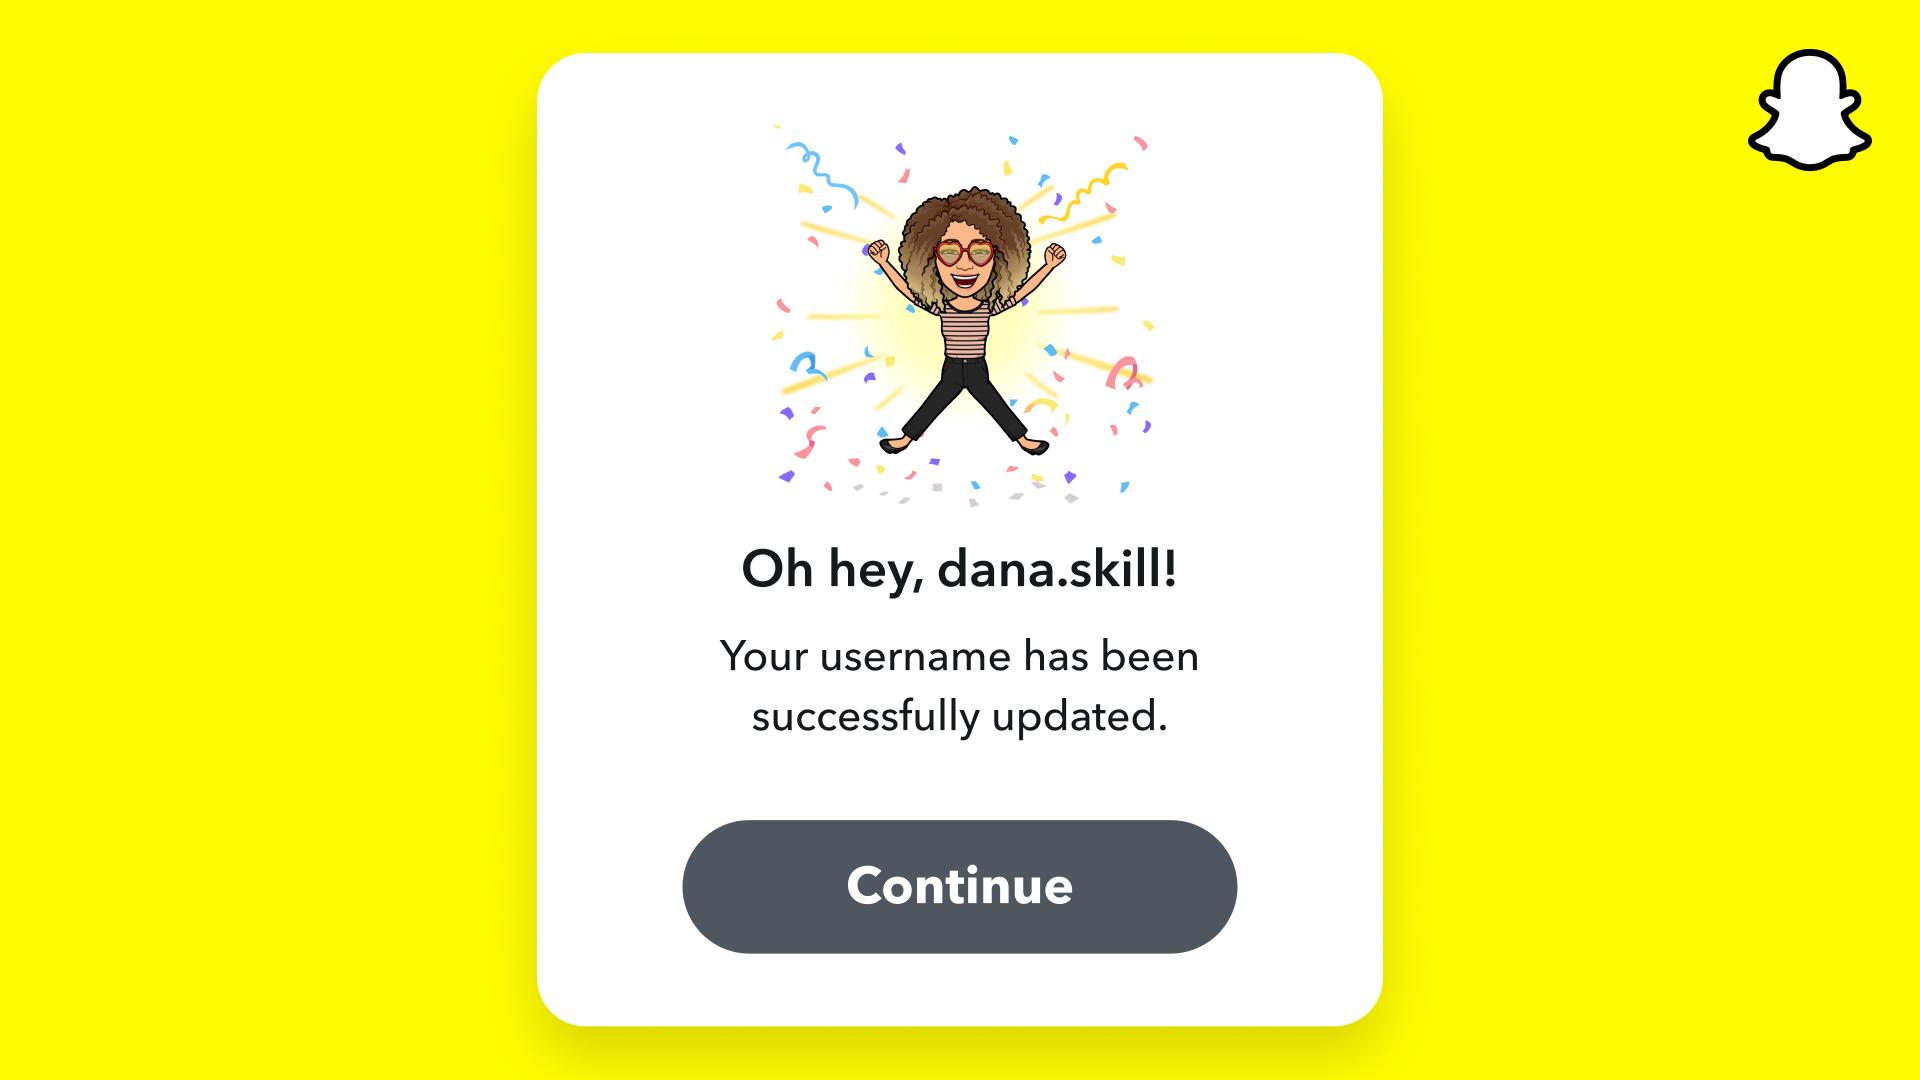 Snapchat will let you change your username starting February 23 | TechCrunch